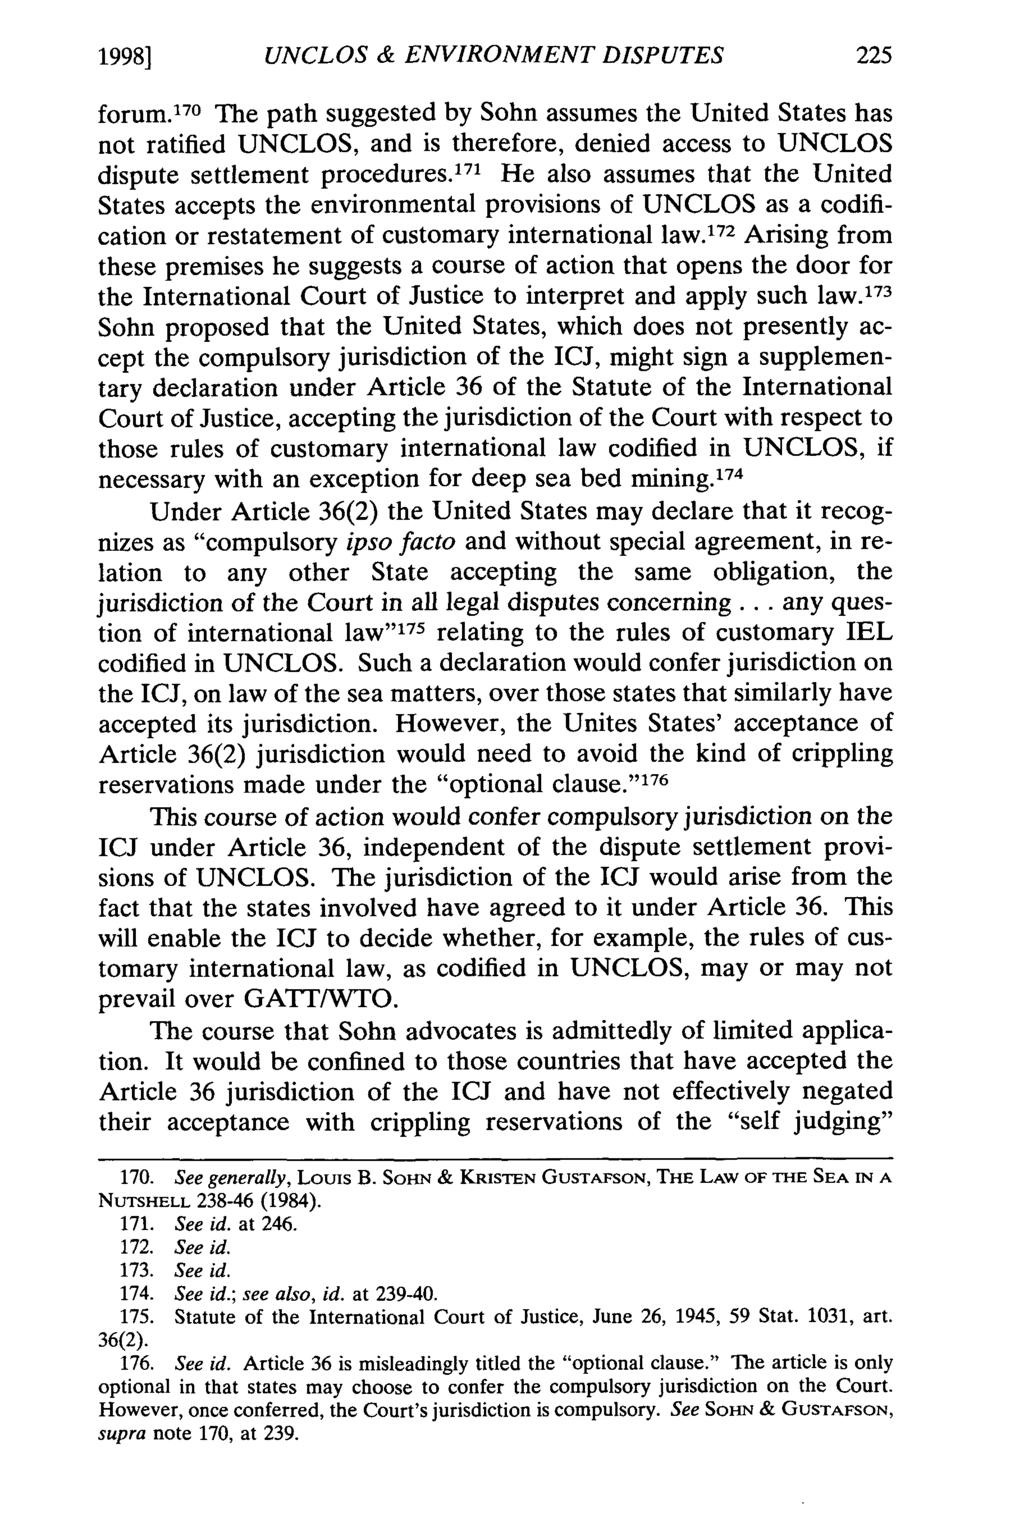 1998] UNCLOS & ENVIRONMENT DISPUTES forum. 17 0 The path suggested by Sohn assumes the United States has not ratified UNCLOS, and is therefore, denied access to UNCLOS dispute settlement procedures.